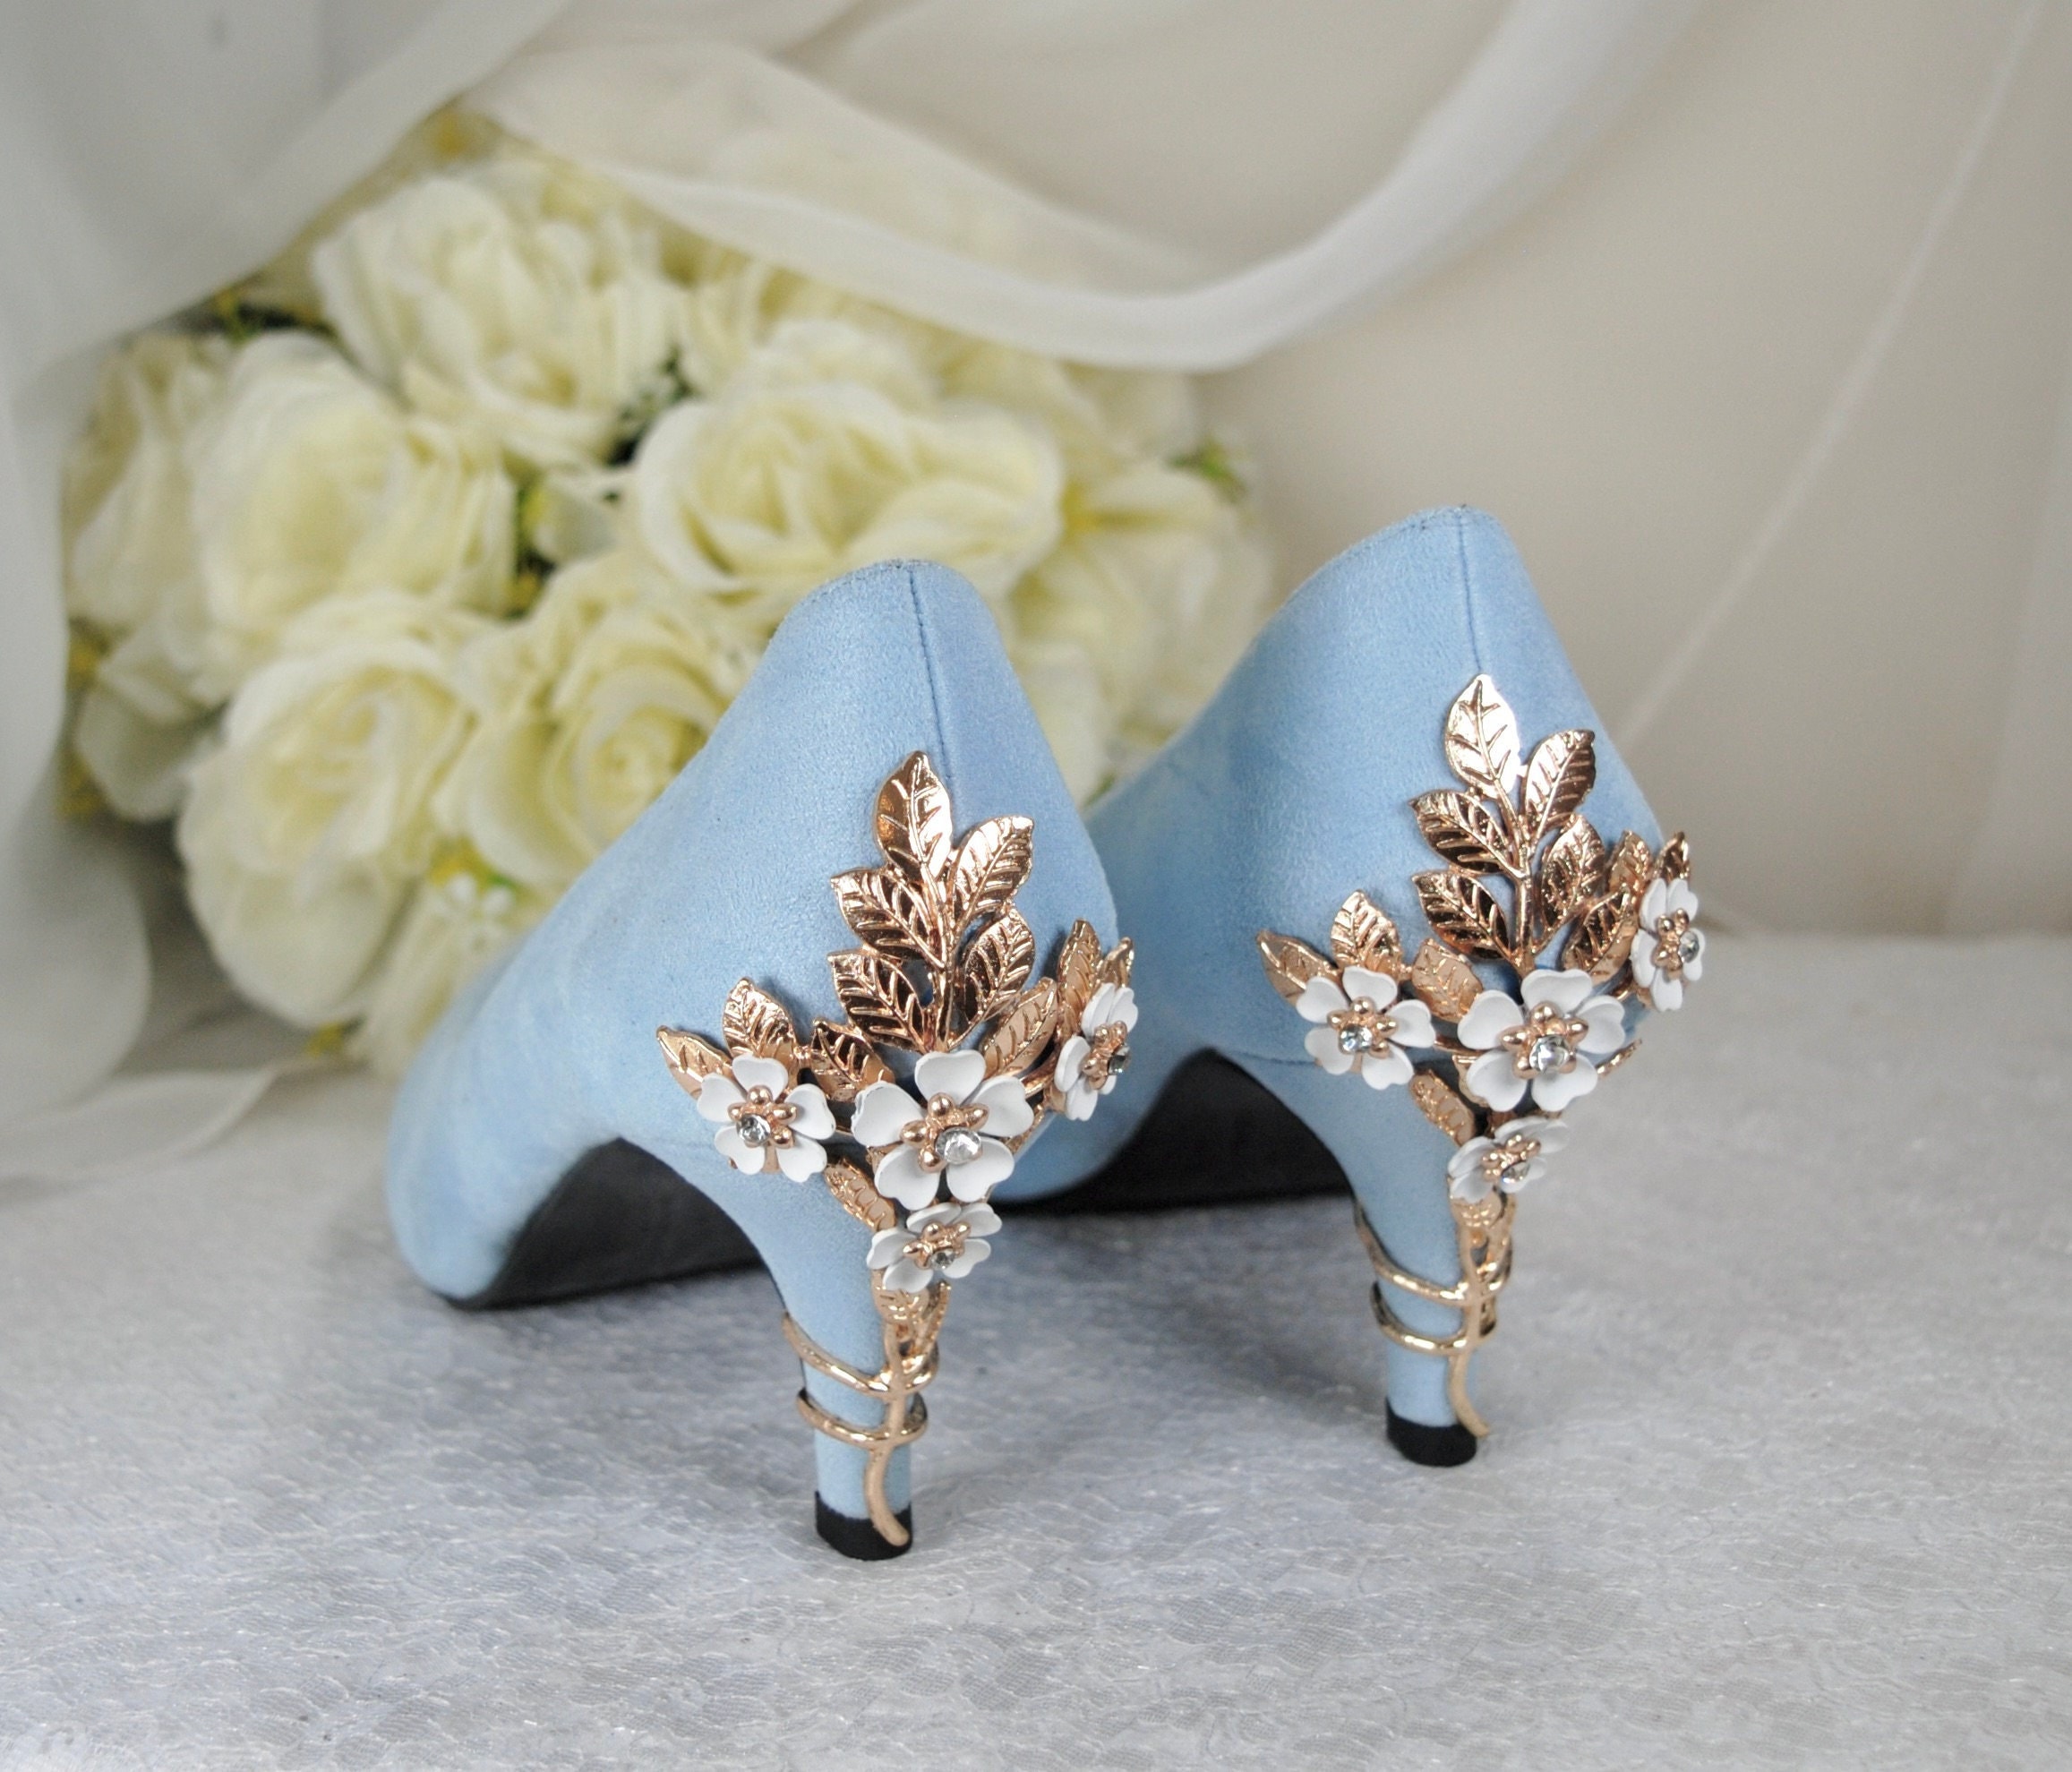 Beautiful Blue Suede Wedding Shoes, ROUND TOE, 6cm 2.3 Inch Low Heel  'cherry Blossom' Embellished Bridal Shoes, Wedding Heels for Bride -   Norway